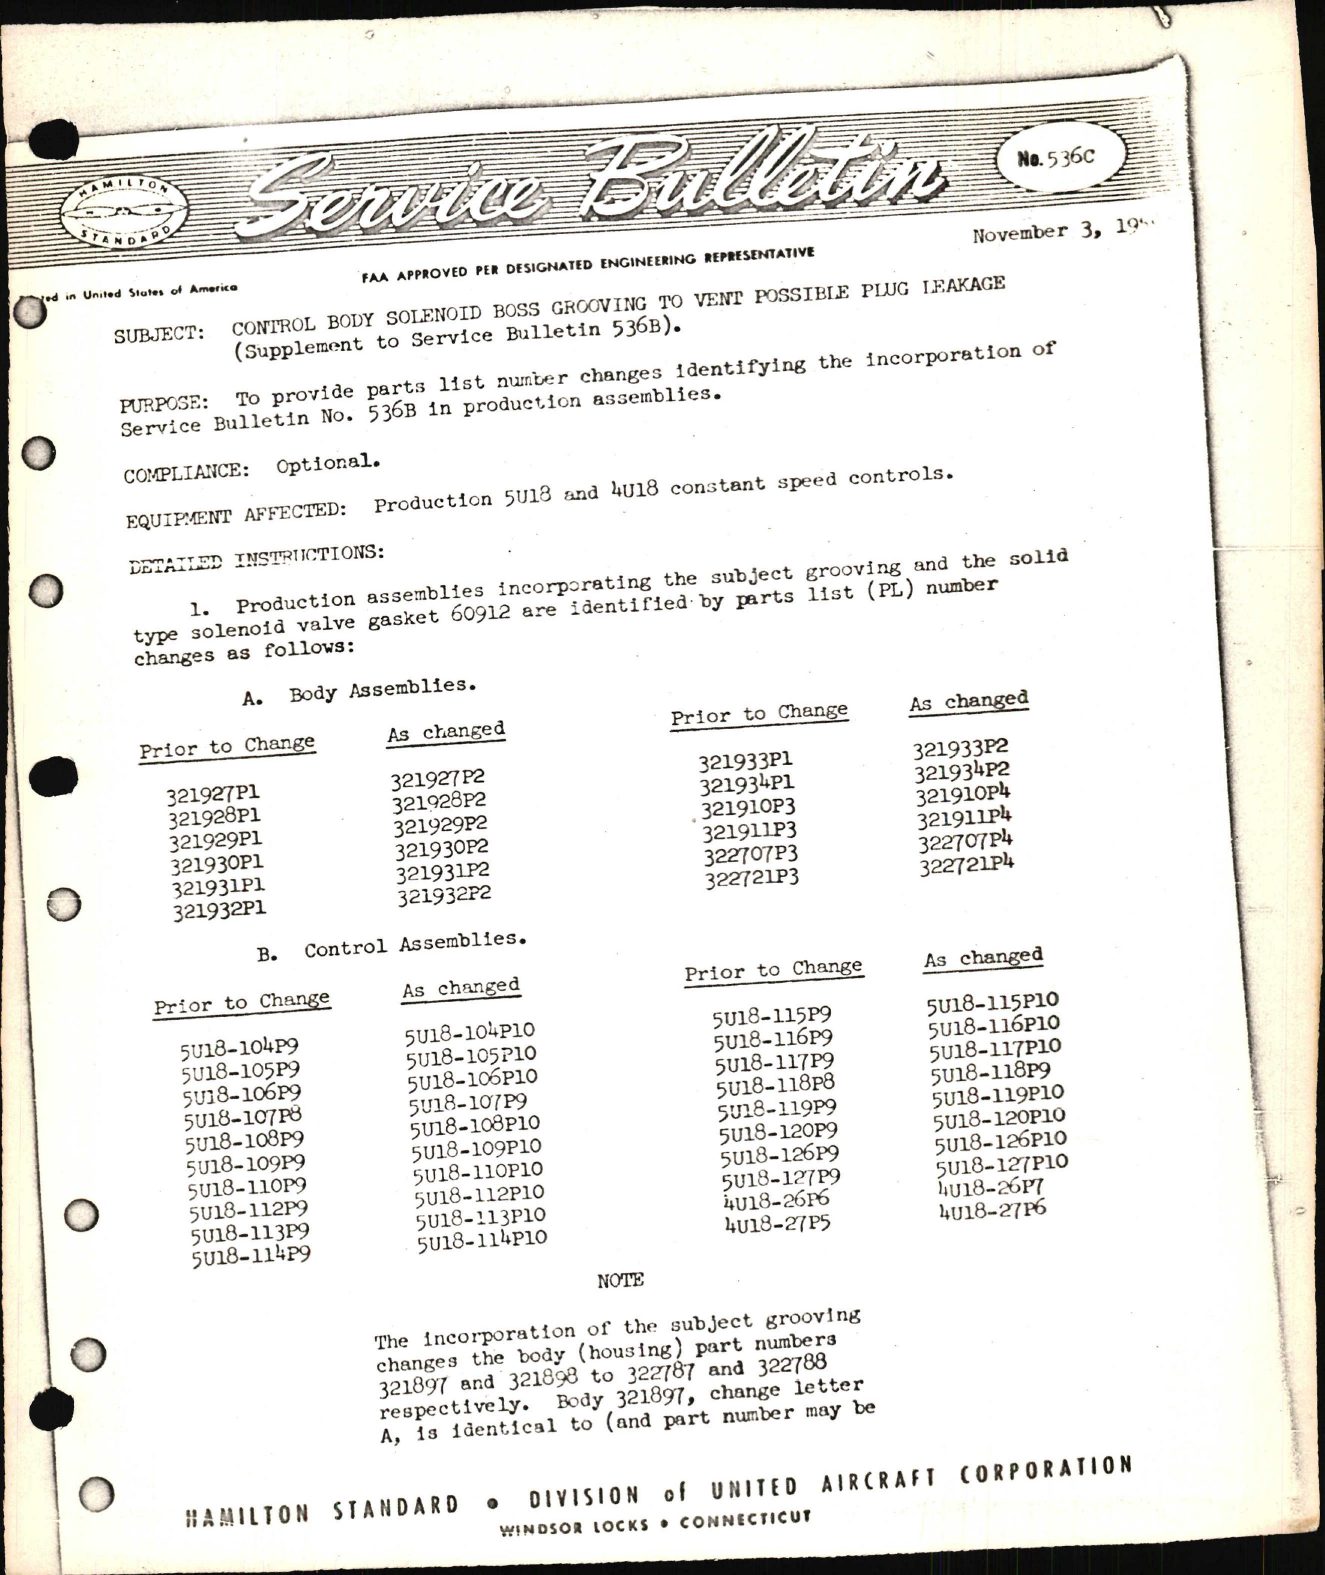 Sample page 1 from AirCorps Library document: Control Body Solenoid Boss Grooving to Vent Possible Plug Leakage